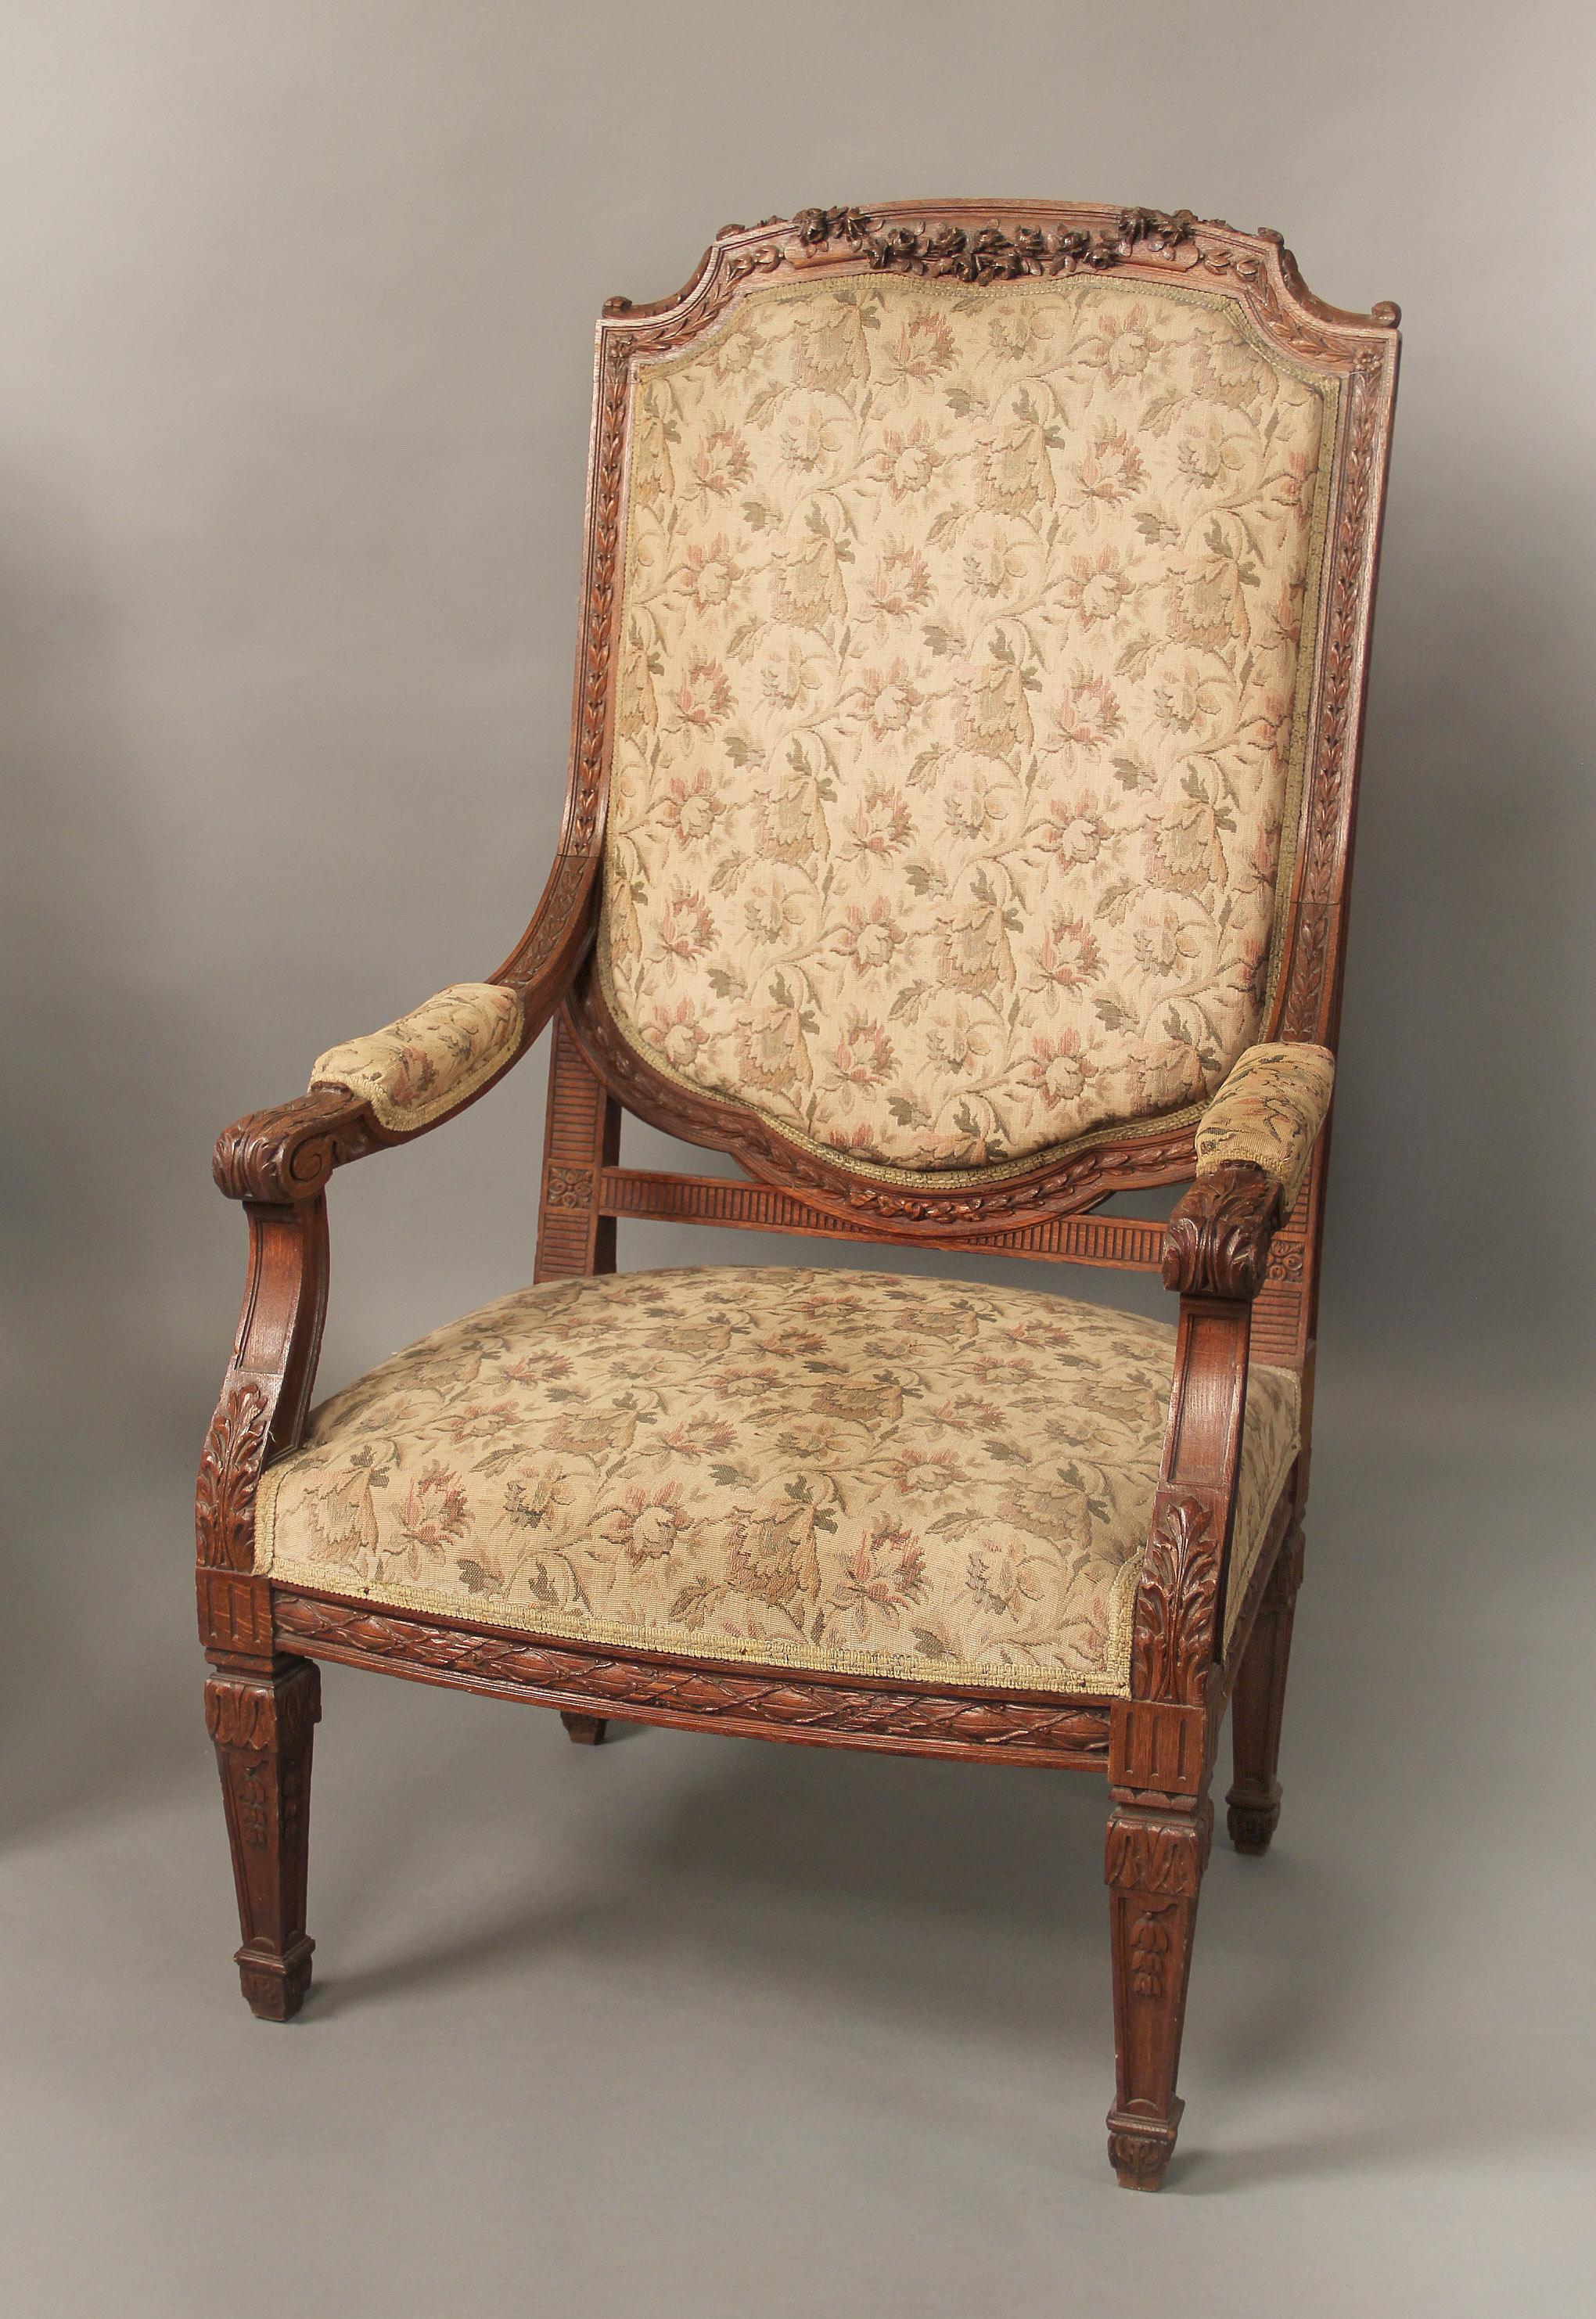 An impressive set of four late 19th century Louis XVI style carved wood armchairs

The oversized chairs with high backs and wide seats, hand carved strong and sturdy floral designed wood frames.